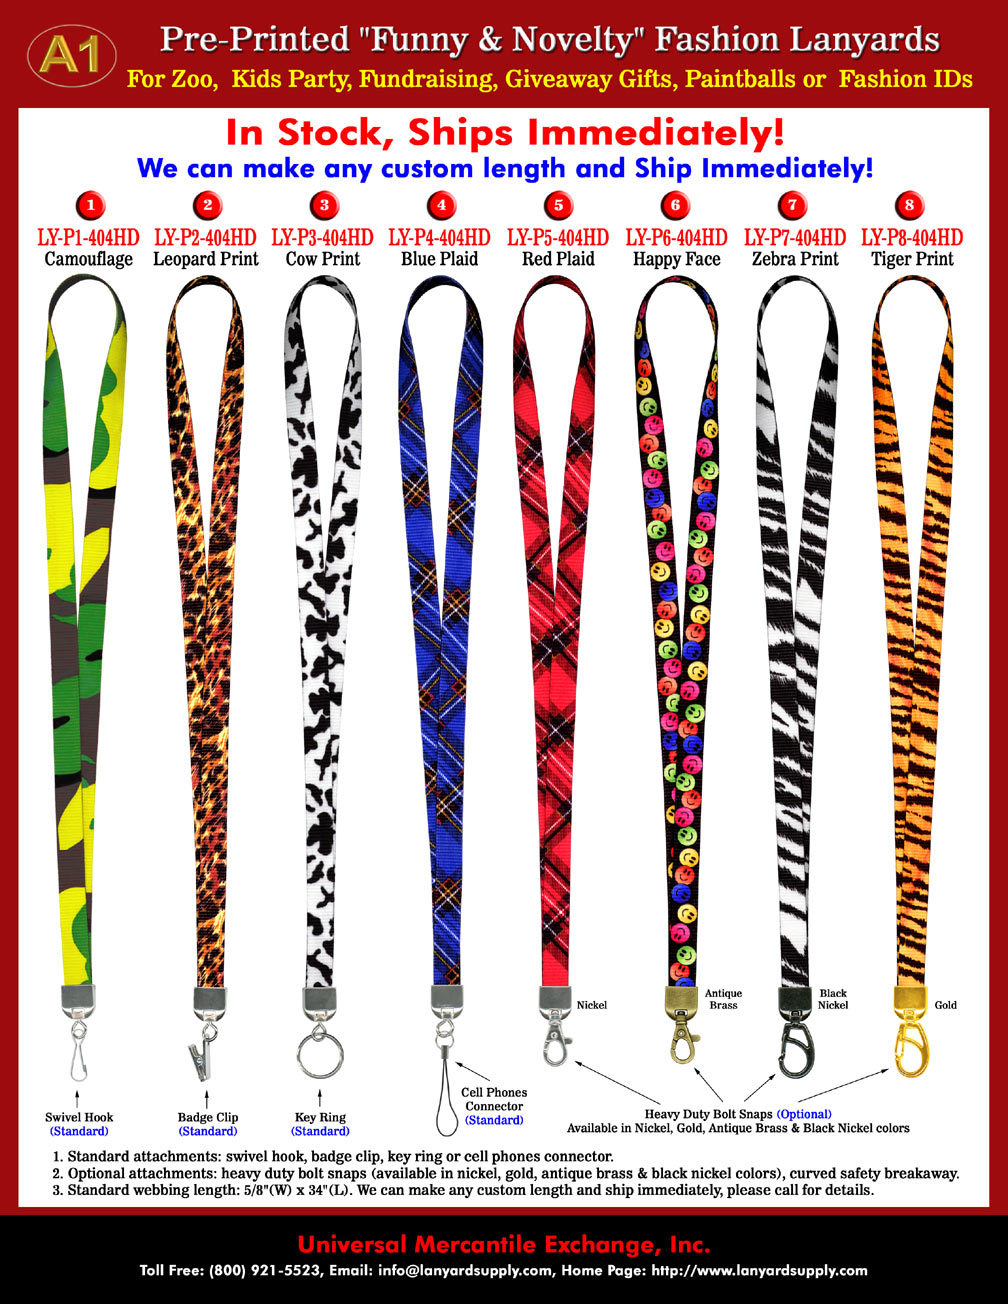 Ez-Adjustable Lanyards: Variable Length Lanyards With Belt or Hat Straps Style of Lanyard Clasps.